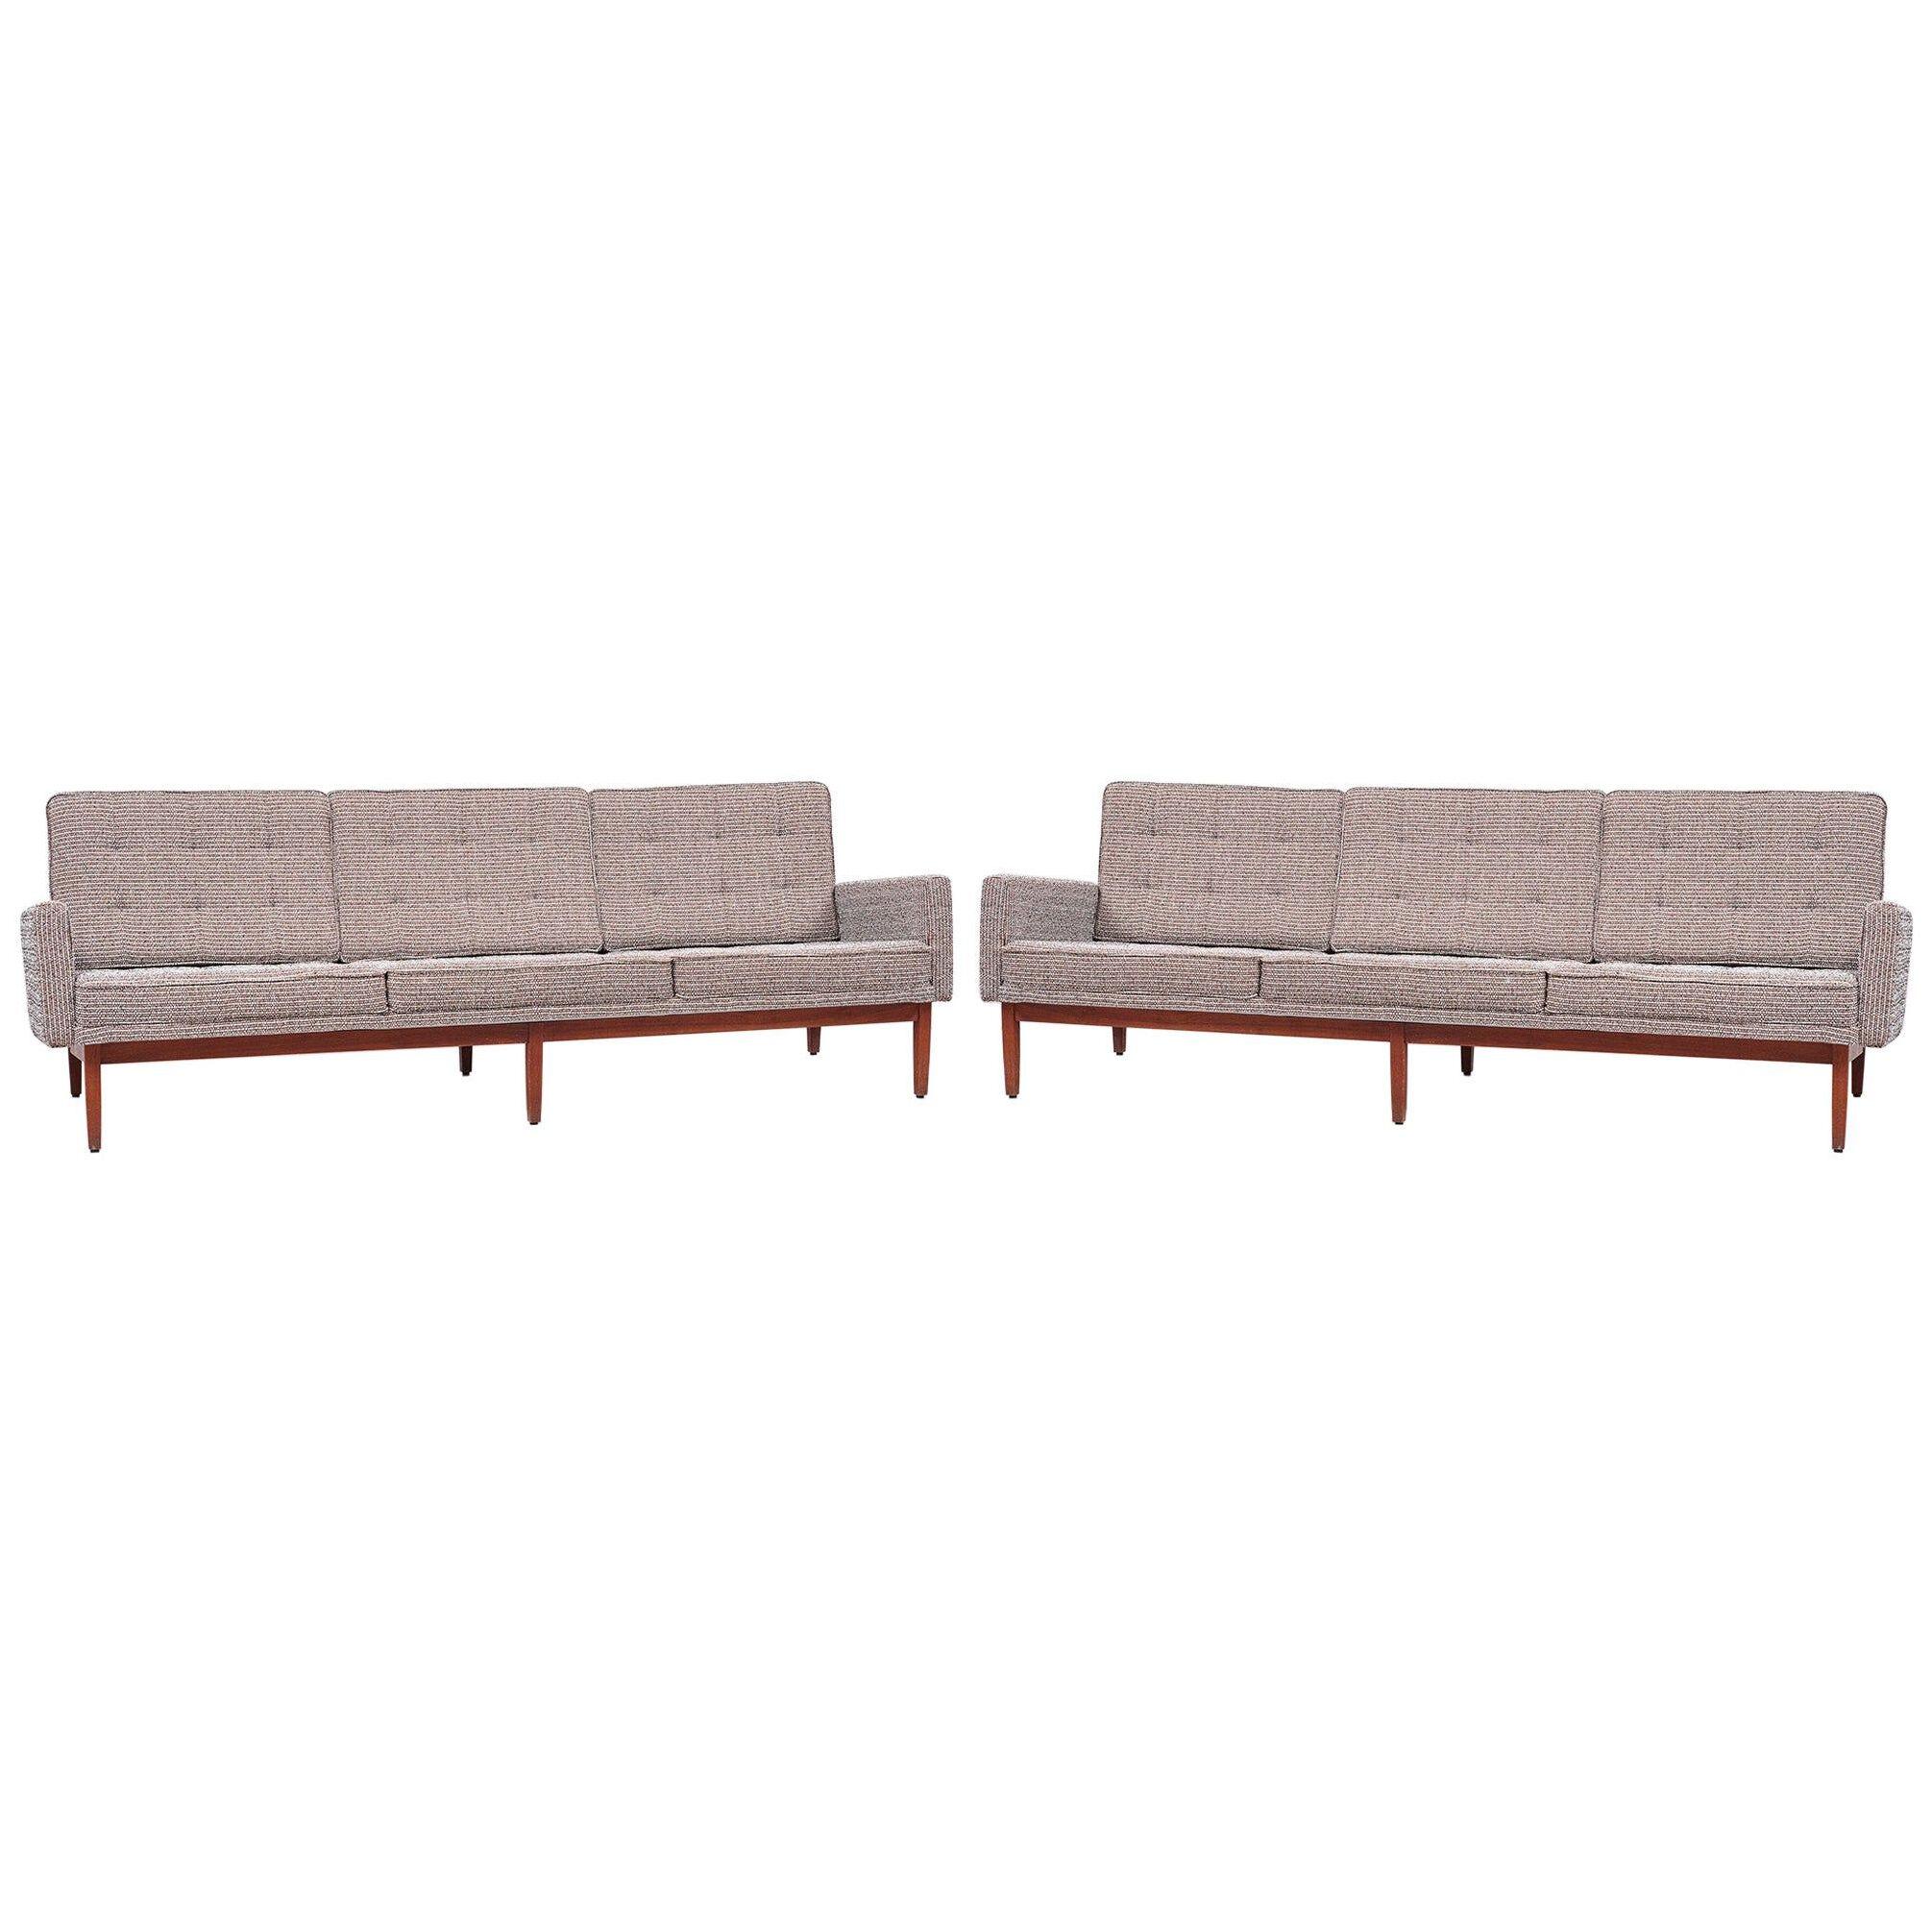 Pair of Florence Knoll 57W Sofas by Knoll Associates 1950s, US